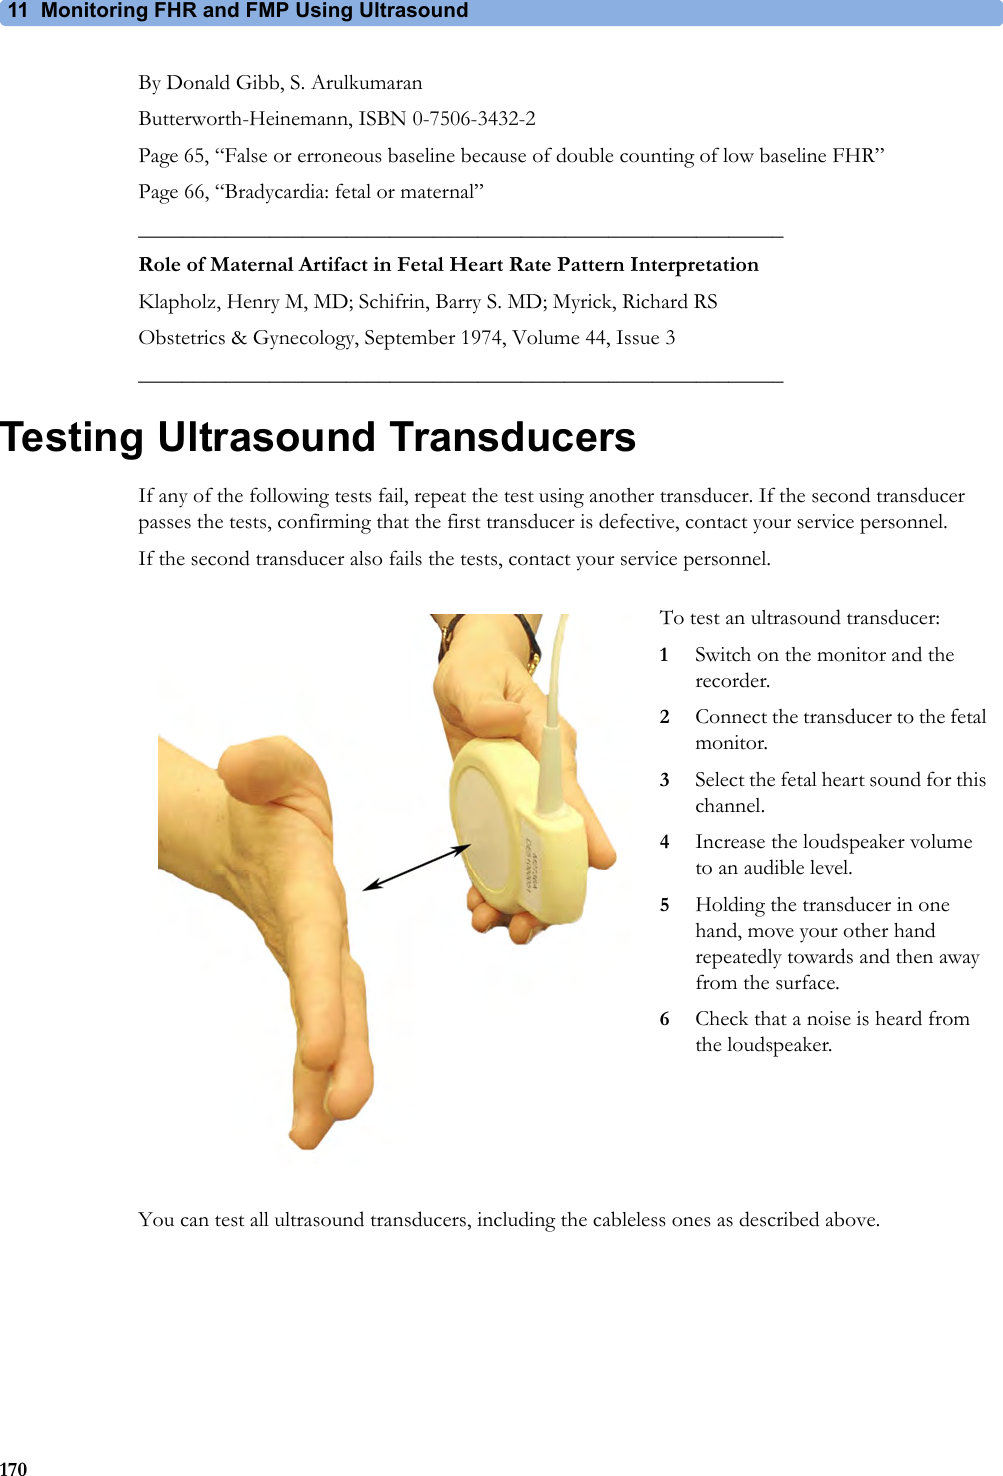 11 Monitoring FHR and FMP Using Ultrasound170By Donald Gibb, S. ArulkumaranButterworth-Heinemann, ISBN 0-7506-3432-2Page 65, “False or erroneous baseline because of double counting of low baseline FHR”Page 66, “Bradycardia: fetal or maternal”___________________________________________________________Role of Maternal Artifact in Fetal Heart Rate Pattern InterpretationKlapholz, Henry M, MD; Schifrin, Barry S. MD; Myrick, Richard RSObstetrics &amp; Gynecology, September 1974, Volume 44, Issue 3___________________________________________________________Testing Ultrasound TransducersIf any of the following tests fail, repeat the test using another transducer. If the second transducer passes the tests, confirming that the first transducer is defective, contact your service personnel.If the second transducer also fails the tests, contact your service personnel.You can test all ultrasound transducers, including the cableless ones as described above.To test an ultrasound transducer:1Switch on the monitor and the recorder.2Connect the transducer to the fetal monitor.3Select the fetal heart sound for this channel.4Increase the loudspeaker volume to an audible level.5Holding the transducer in one hand, move your other hand repeatedly towards and then away from the surface.6Check that a noise is heard from the loudspeaker.